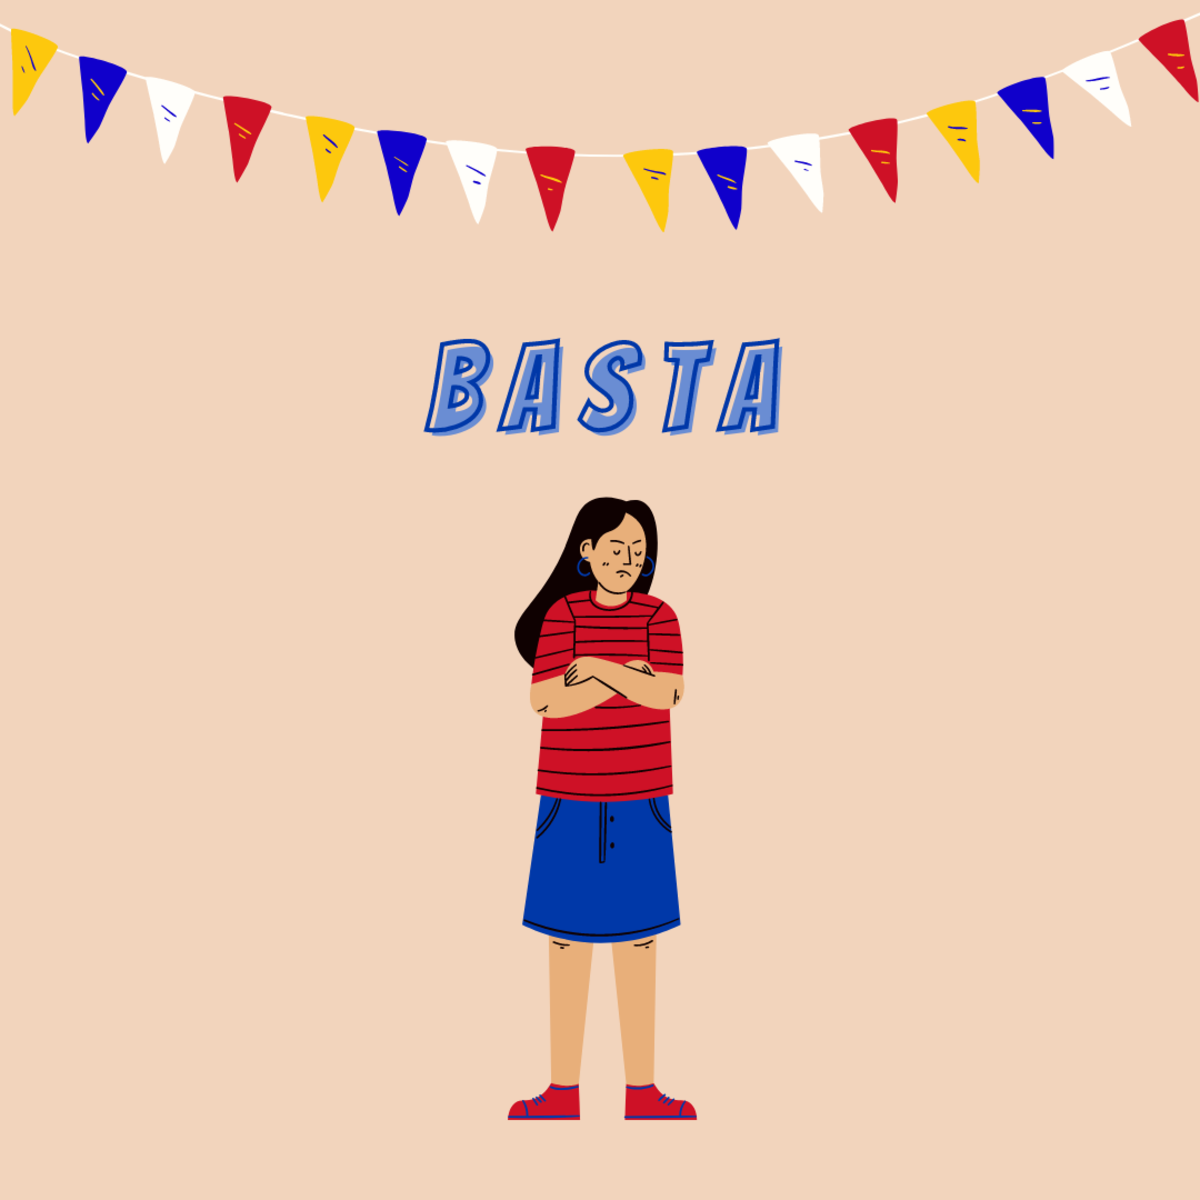 "Basta"—don't ask questions; just do as I say